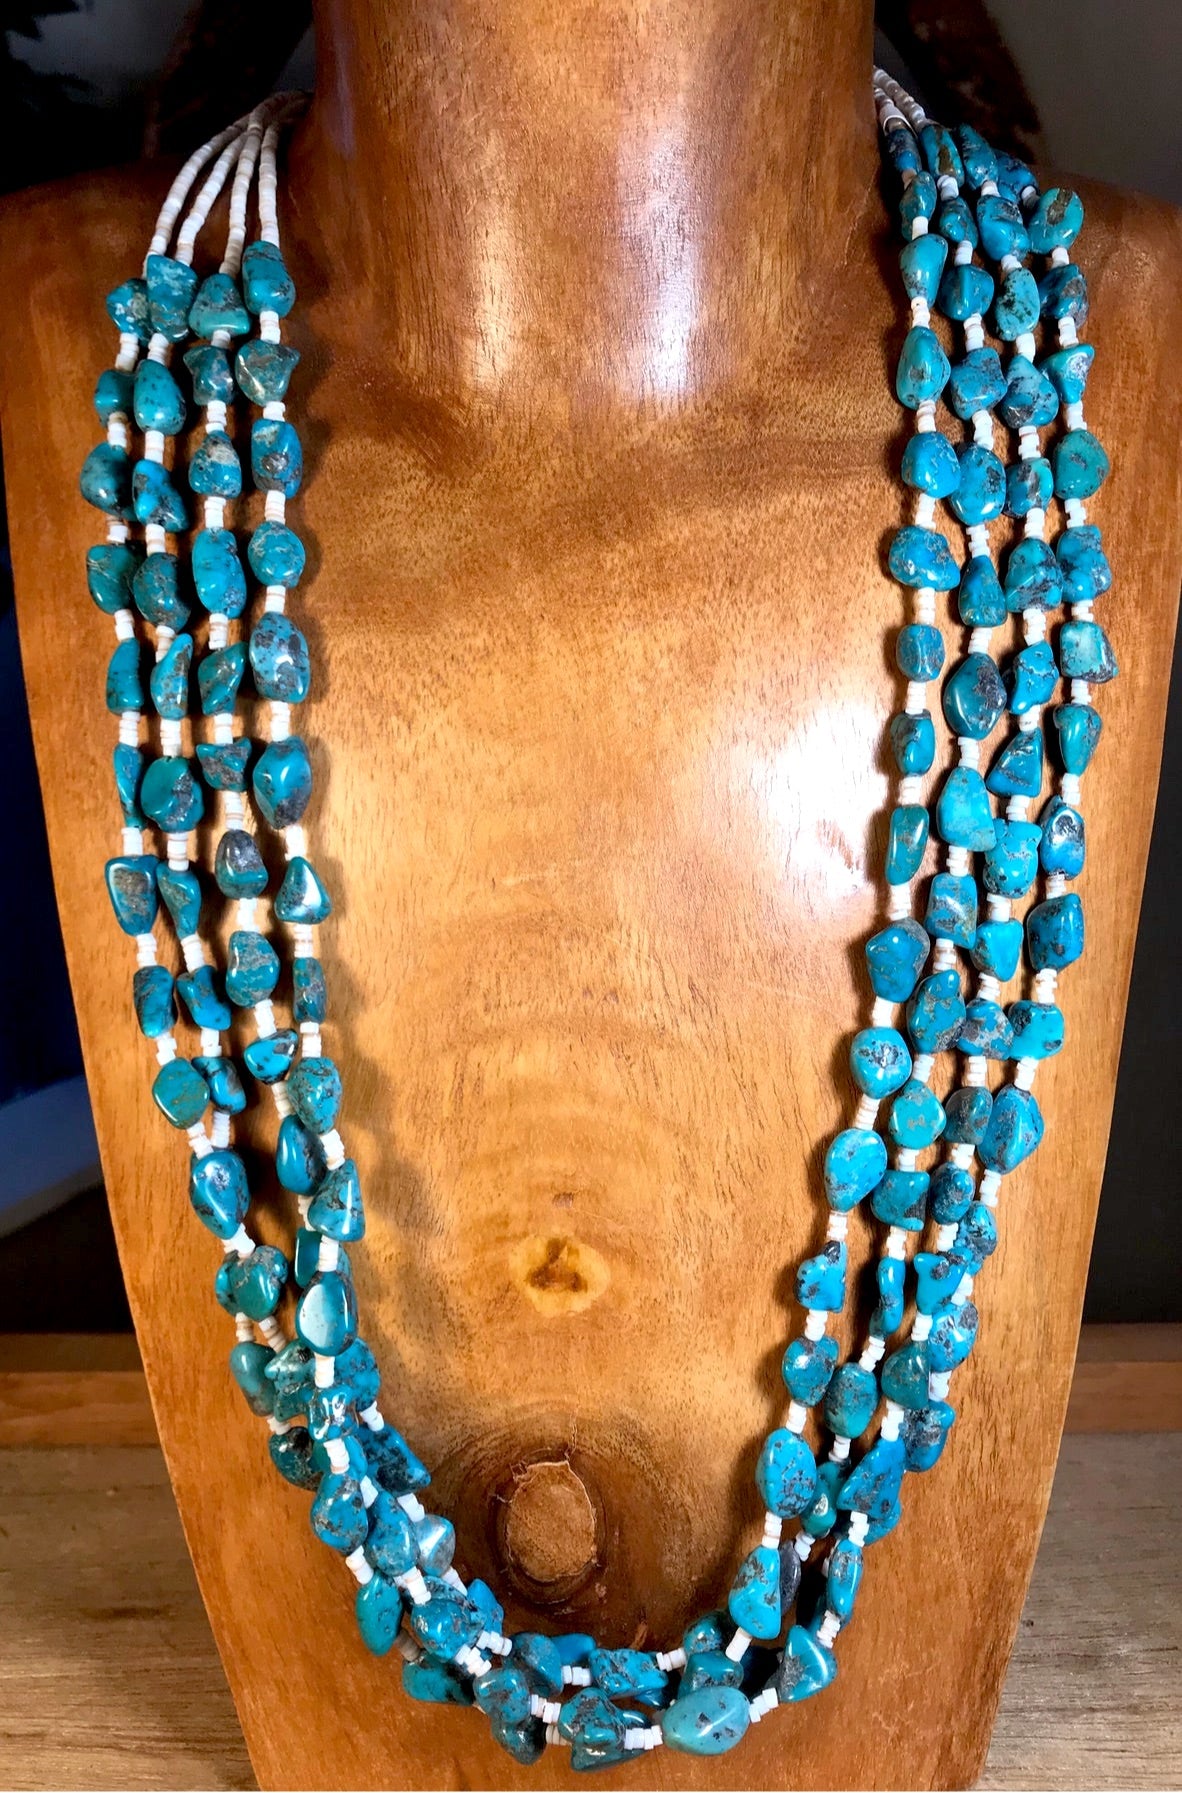 The Sherry 4 strand Turquoise Necklace - Ny Texas Style Boutique Four strand Native made 30" inch length turquoise and heishi sterling silver necklace. The perfect piece to layer alone or with other necklaces. Size: 30" Inches Length Stone: Turquoise | Turquoise Native Made Sterling Silver Necklace, Western Necklace Jewelry, Boho 30" Inches Length Necklace, Cowgirl NFR Rodeo Jewelry